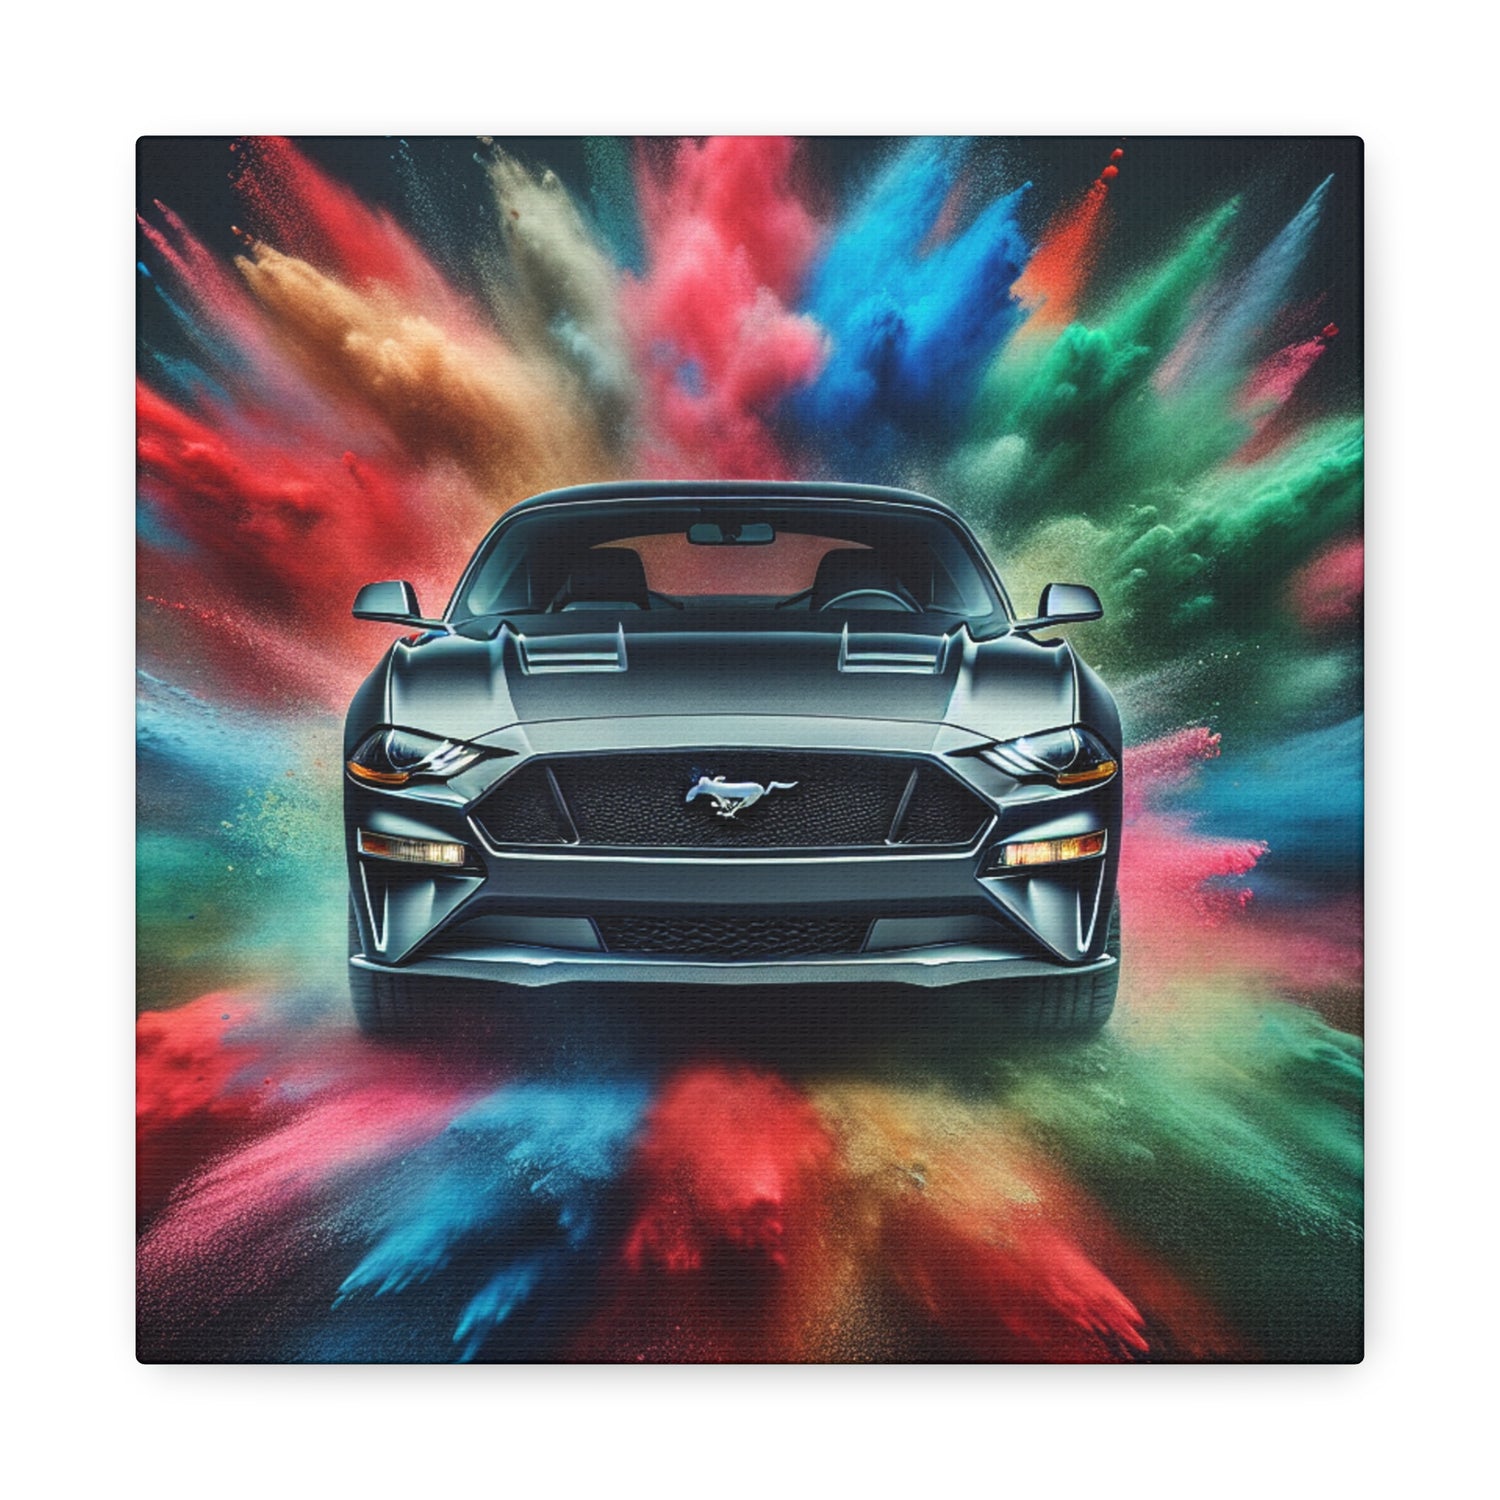 Ford Mustang Vintage Artwork - Handmade Canvas Painting, Wall Decor, Classic Car Lover Gift Idea, Home and Office Decoration Piece